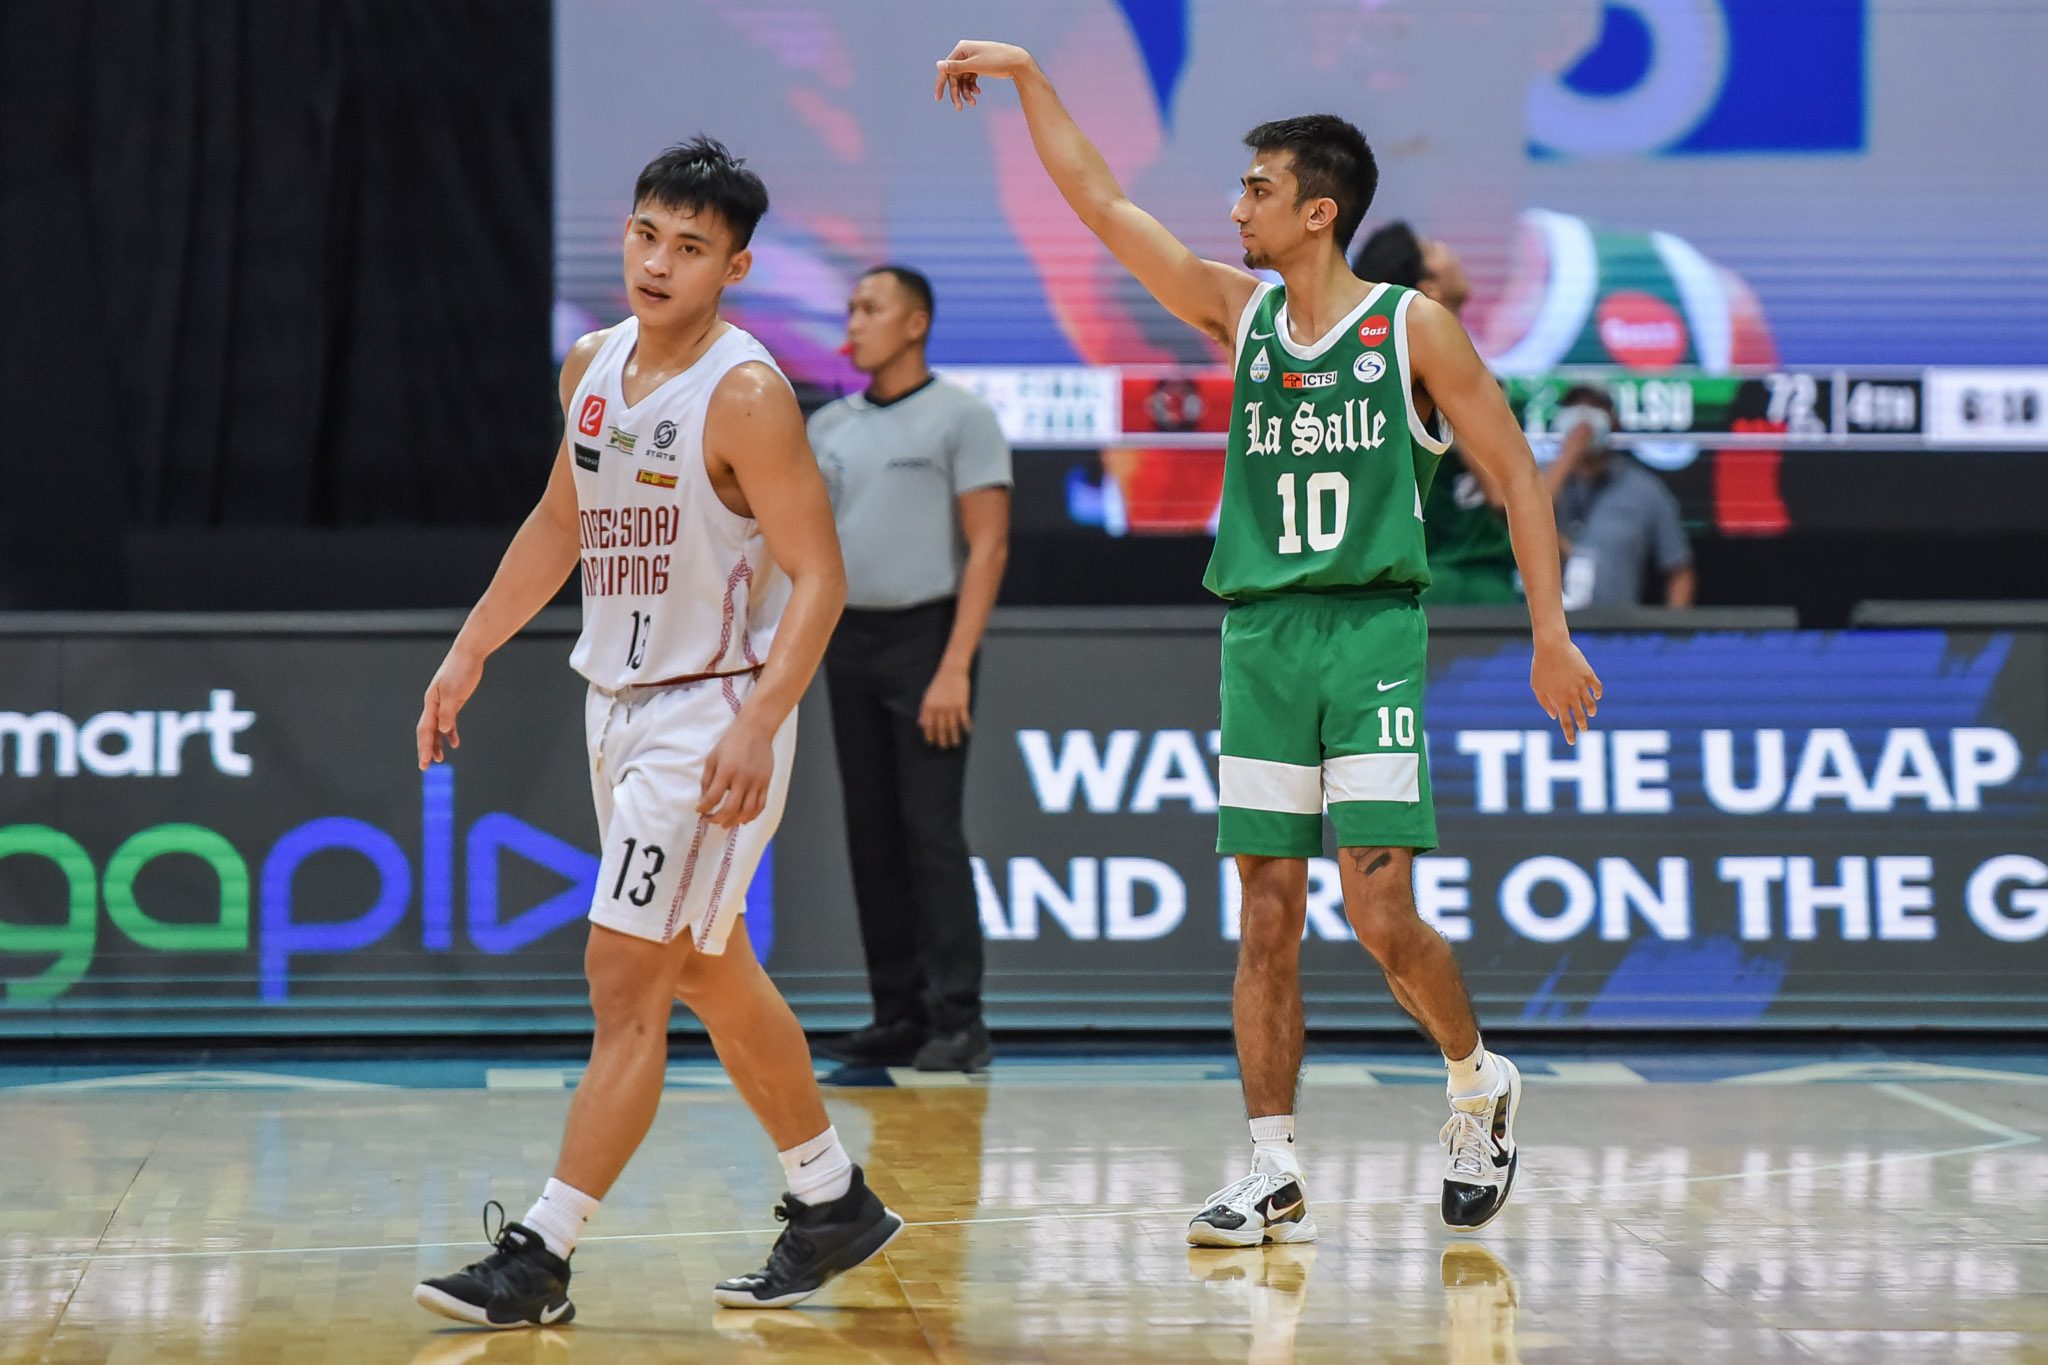 Losing not an option: Nelle erupts for UAAP-best 26 as La Salle forces do-or-die over UP